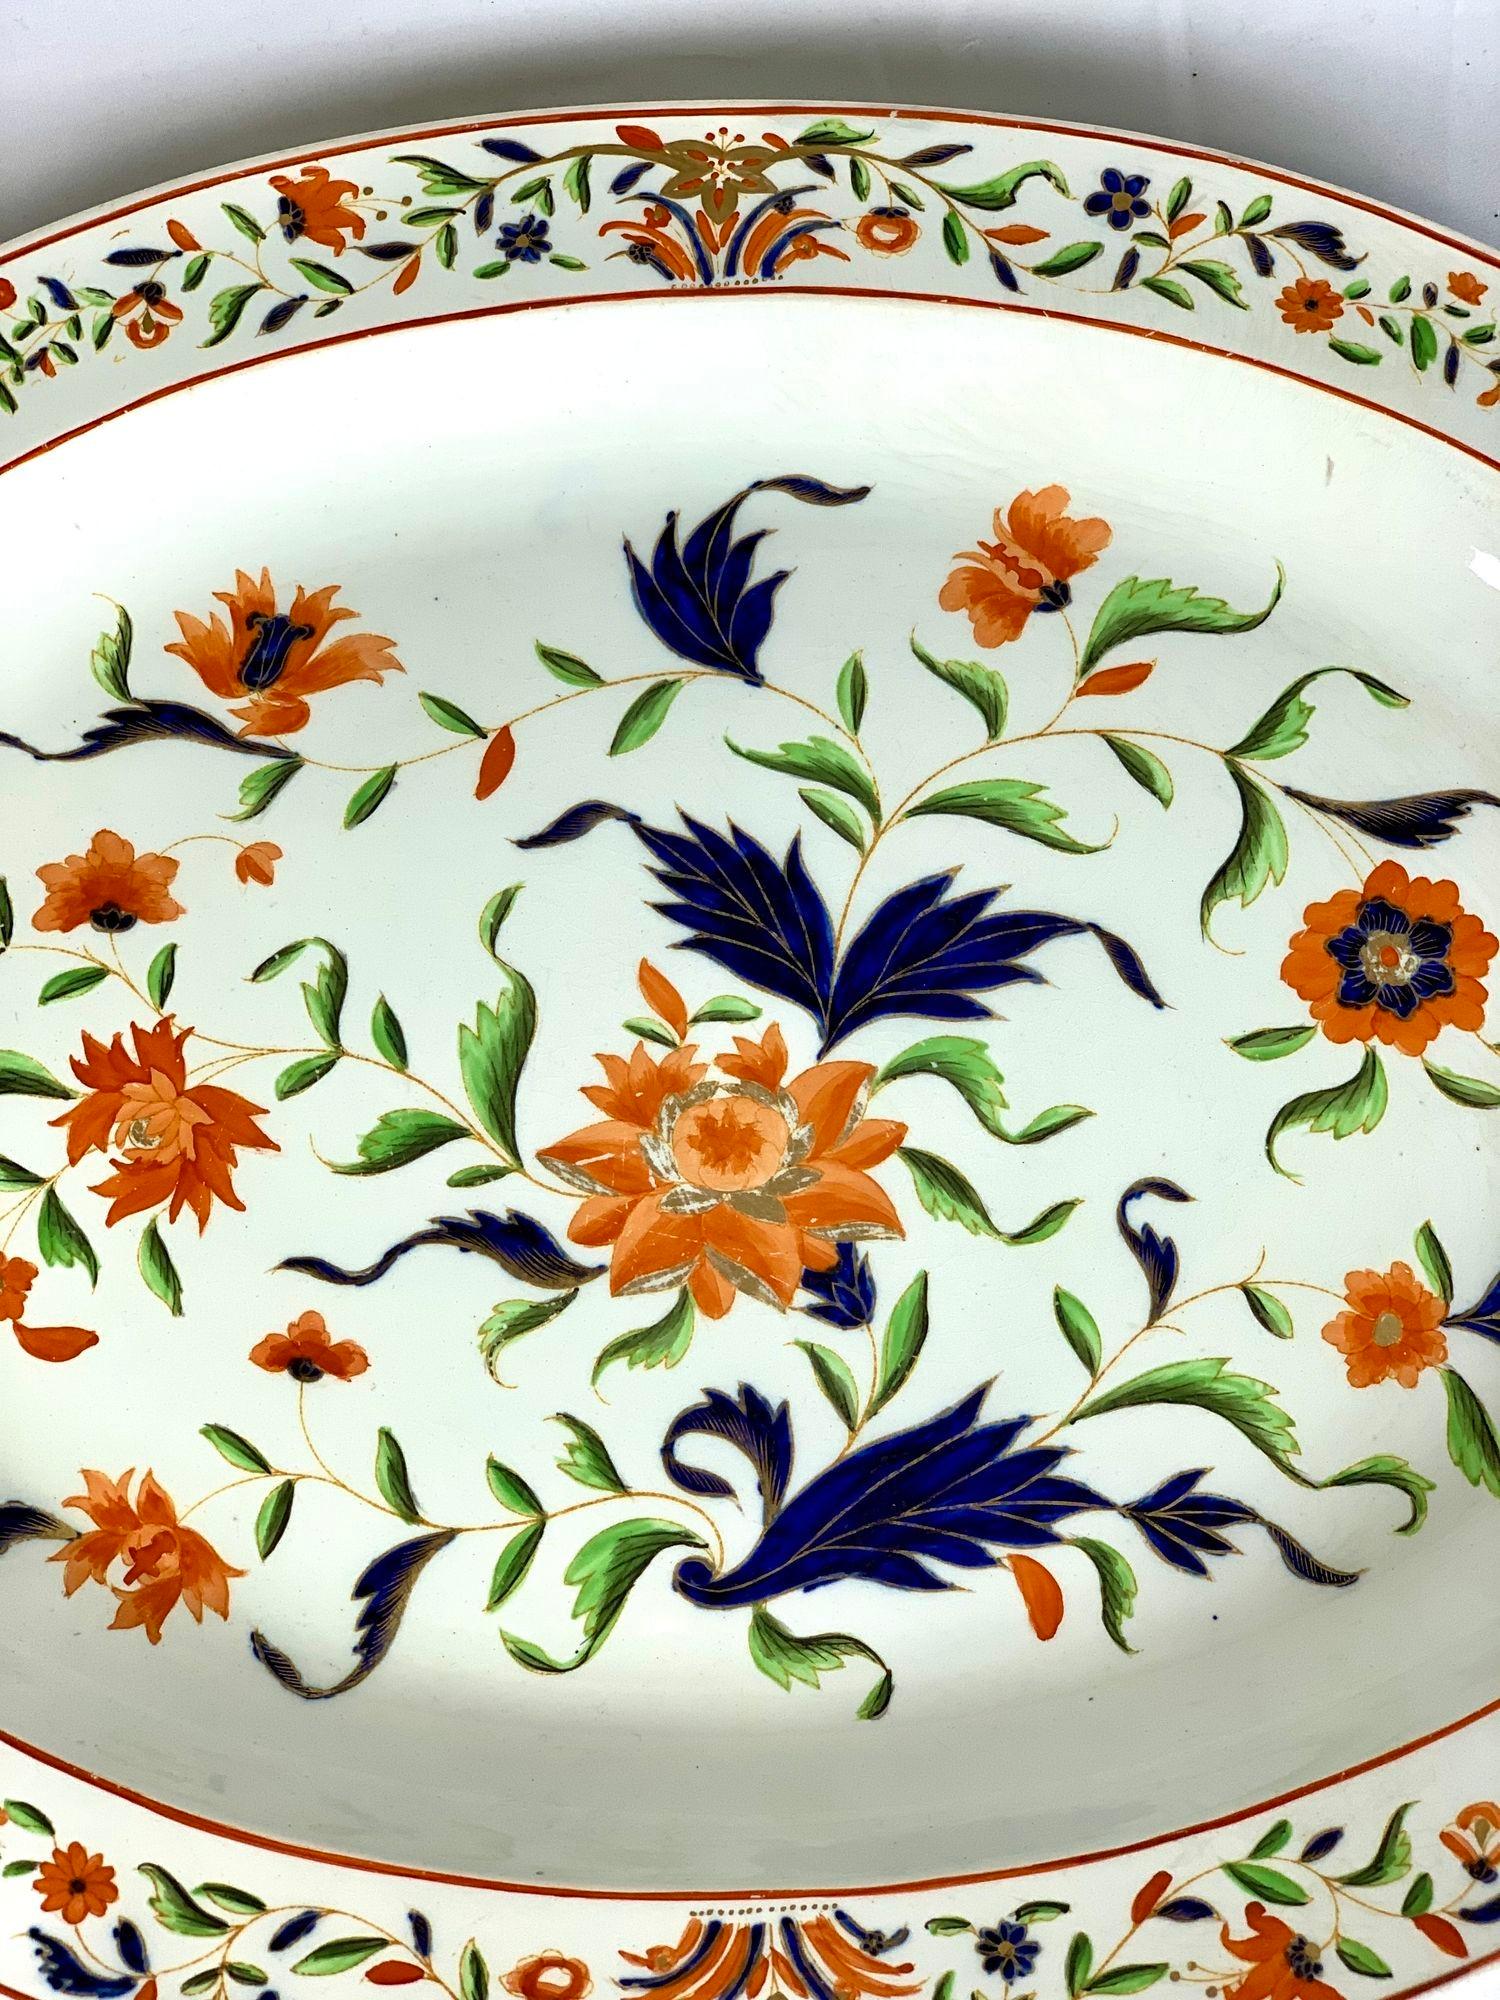 A large and lovely Wedgwood platter decorated with the Imari colors of orange and deep blue with accents of light green and gilt.
The colorful decoration depicts loose sprigs of leaves and flowers.
The border is decorated with a band of smaller